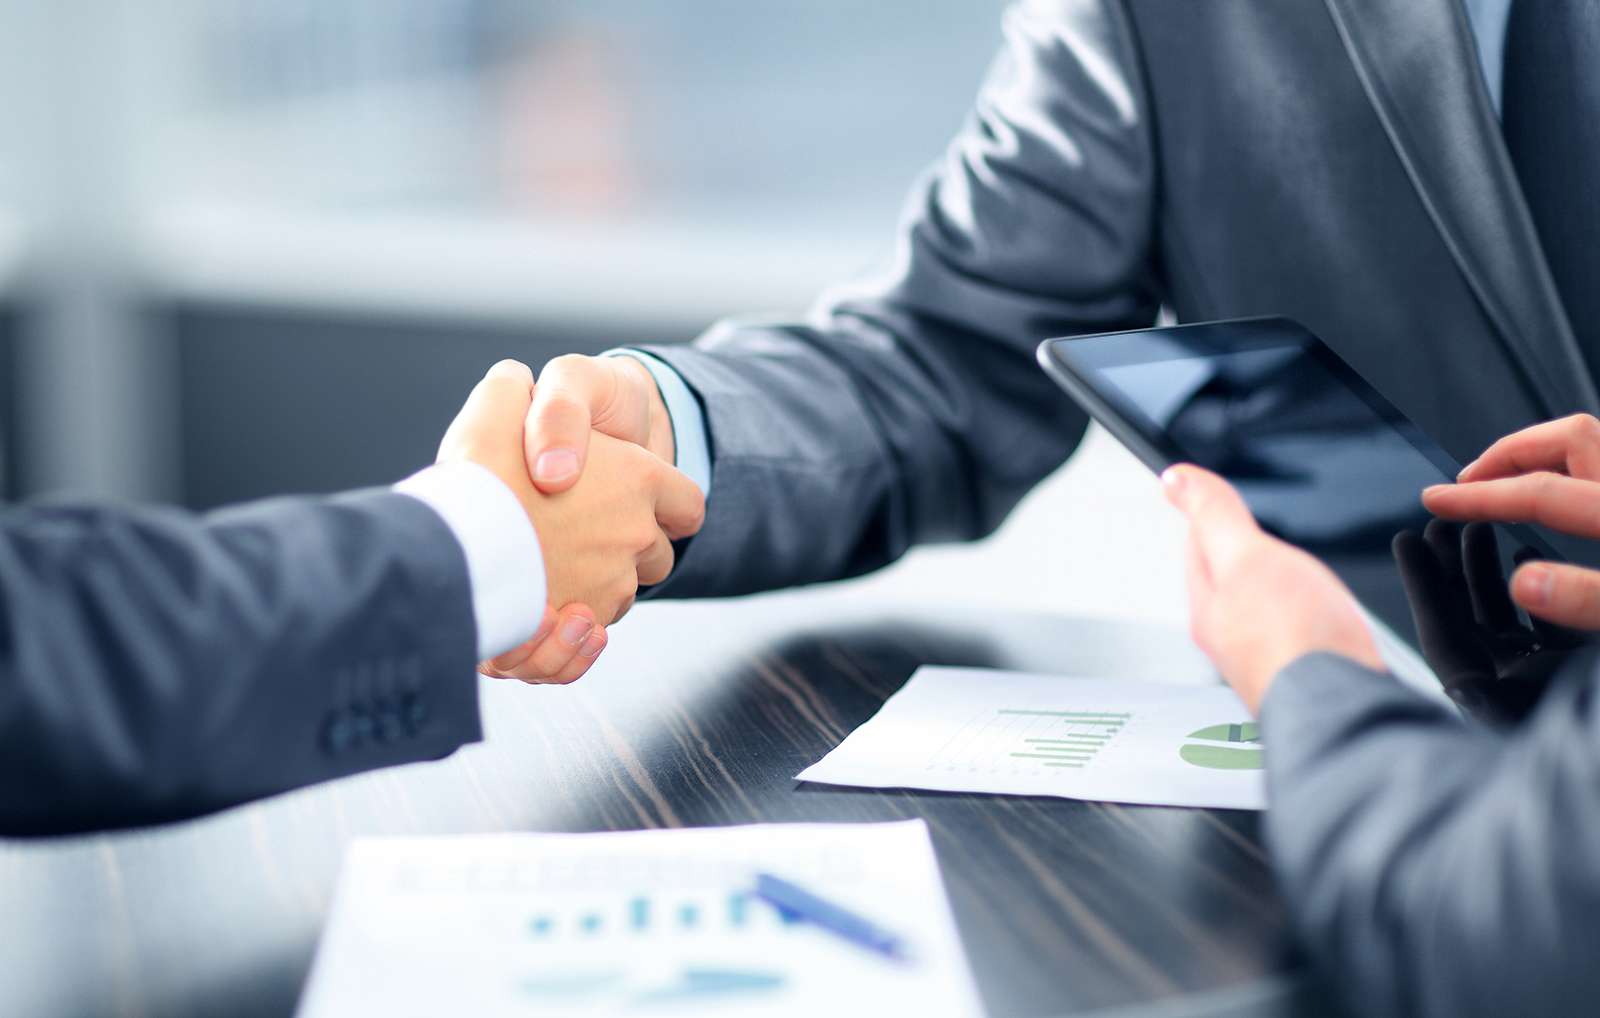 Compliance: business partners shaking hands